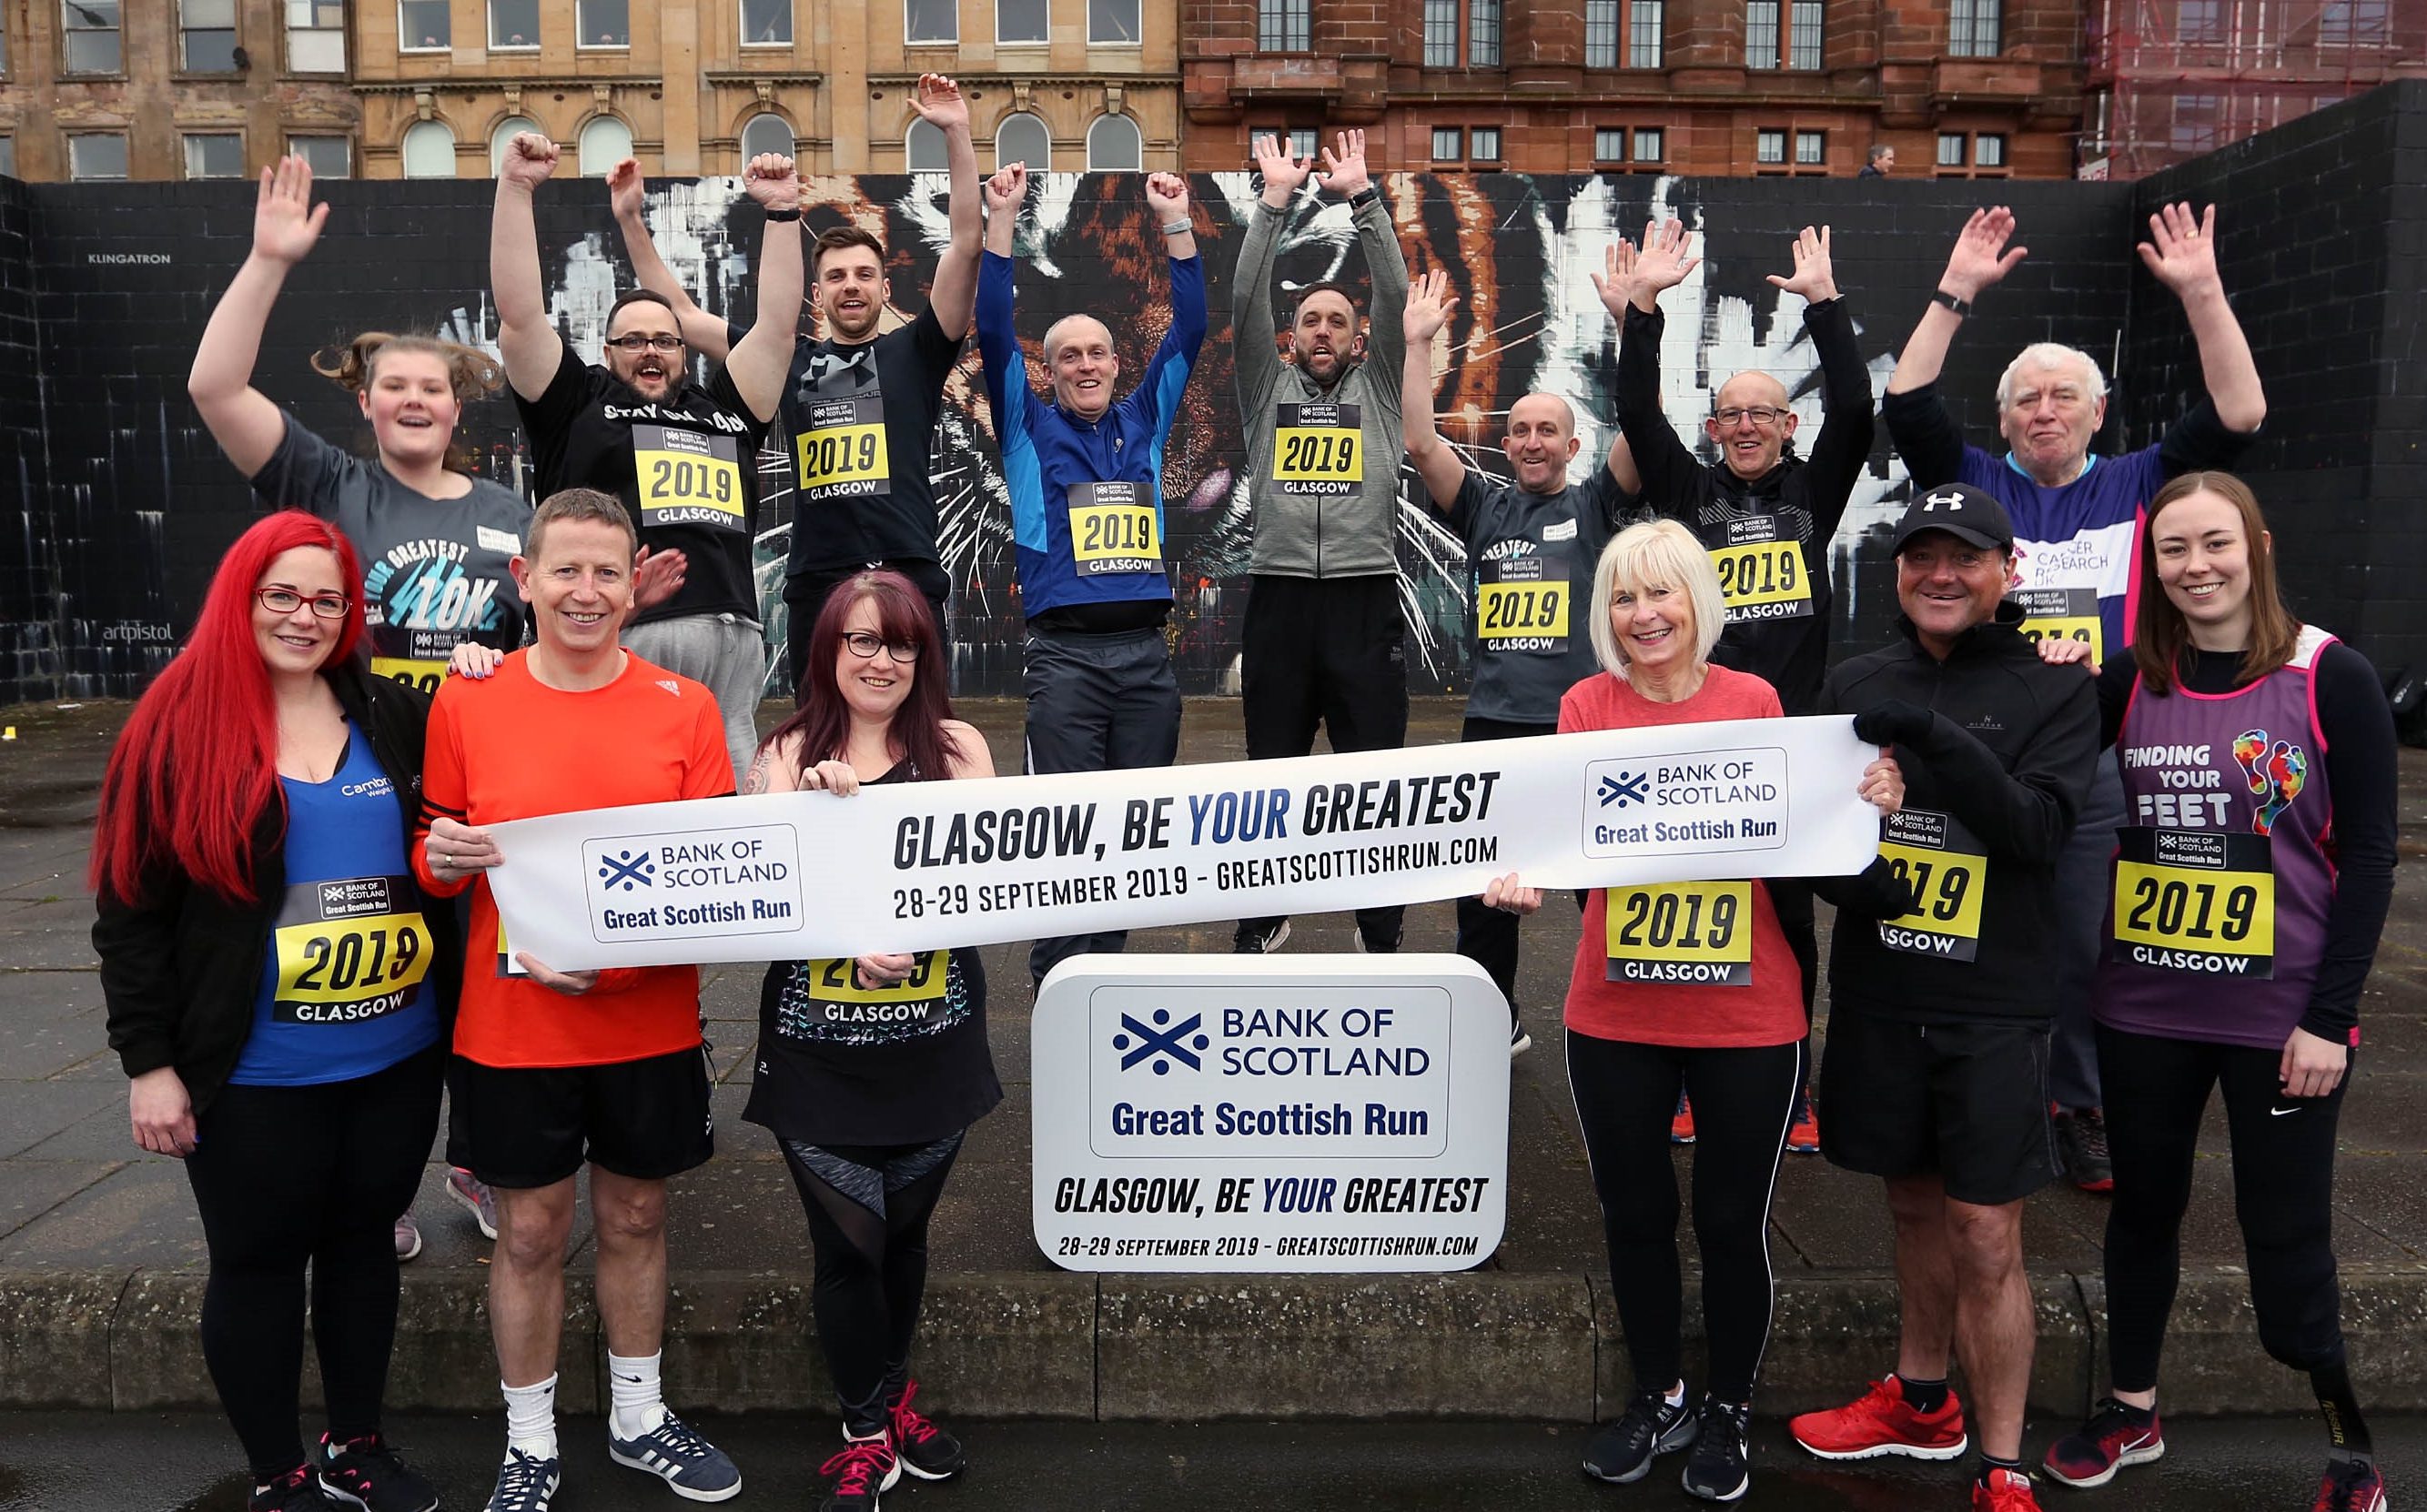 Runners gather to launch this year's Great Scottish Run on the banks of the Clyde